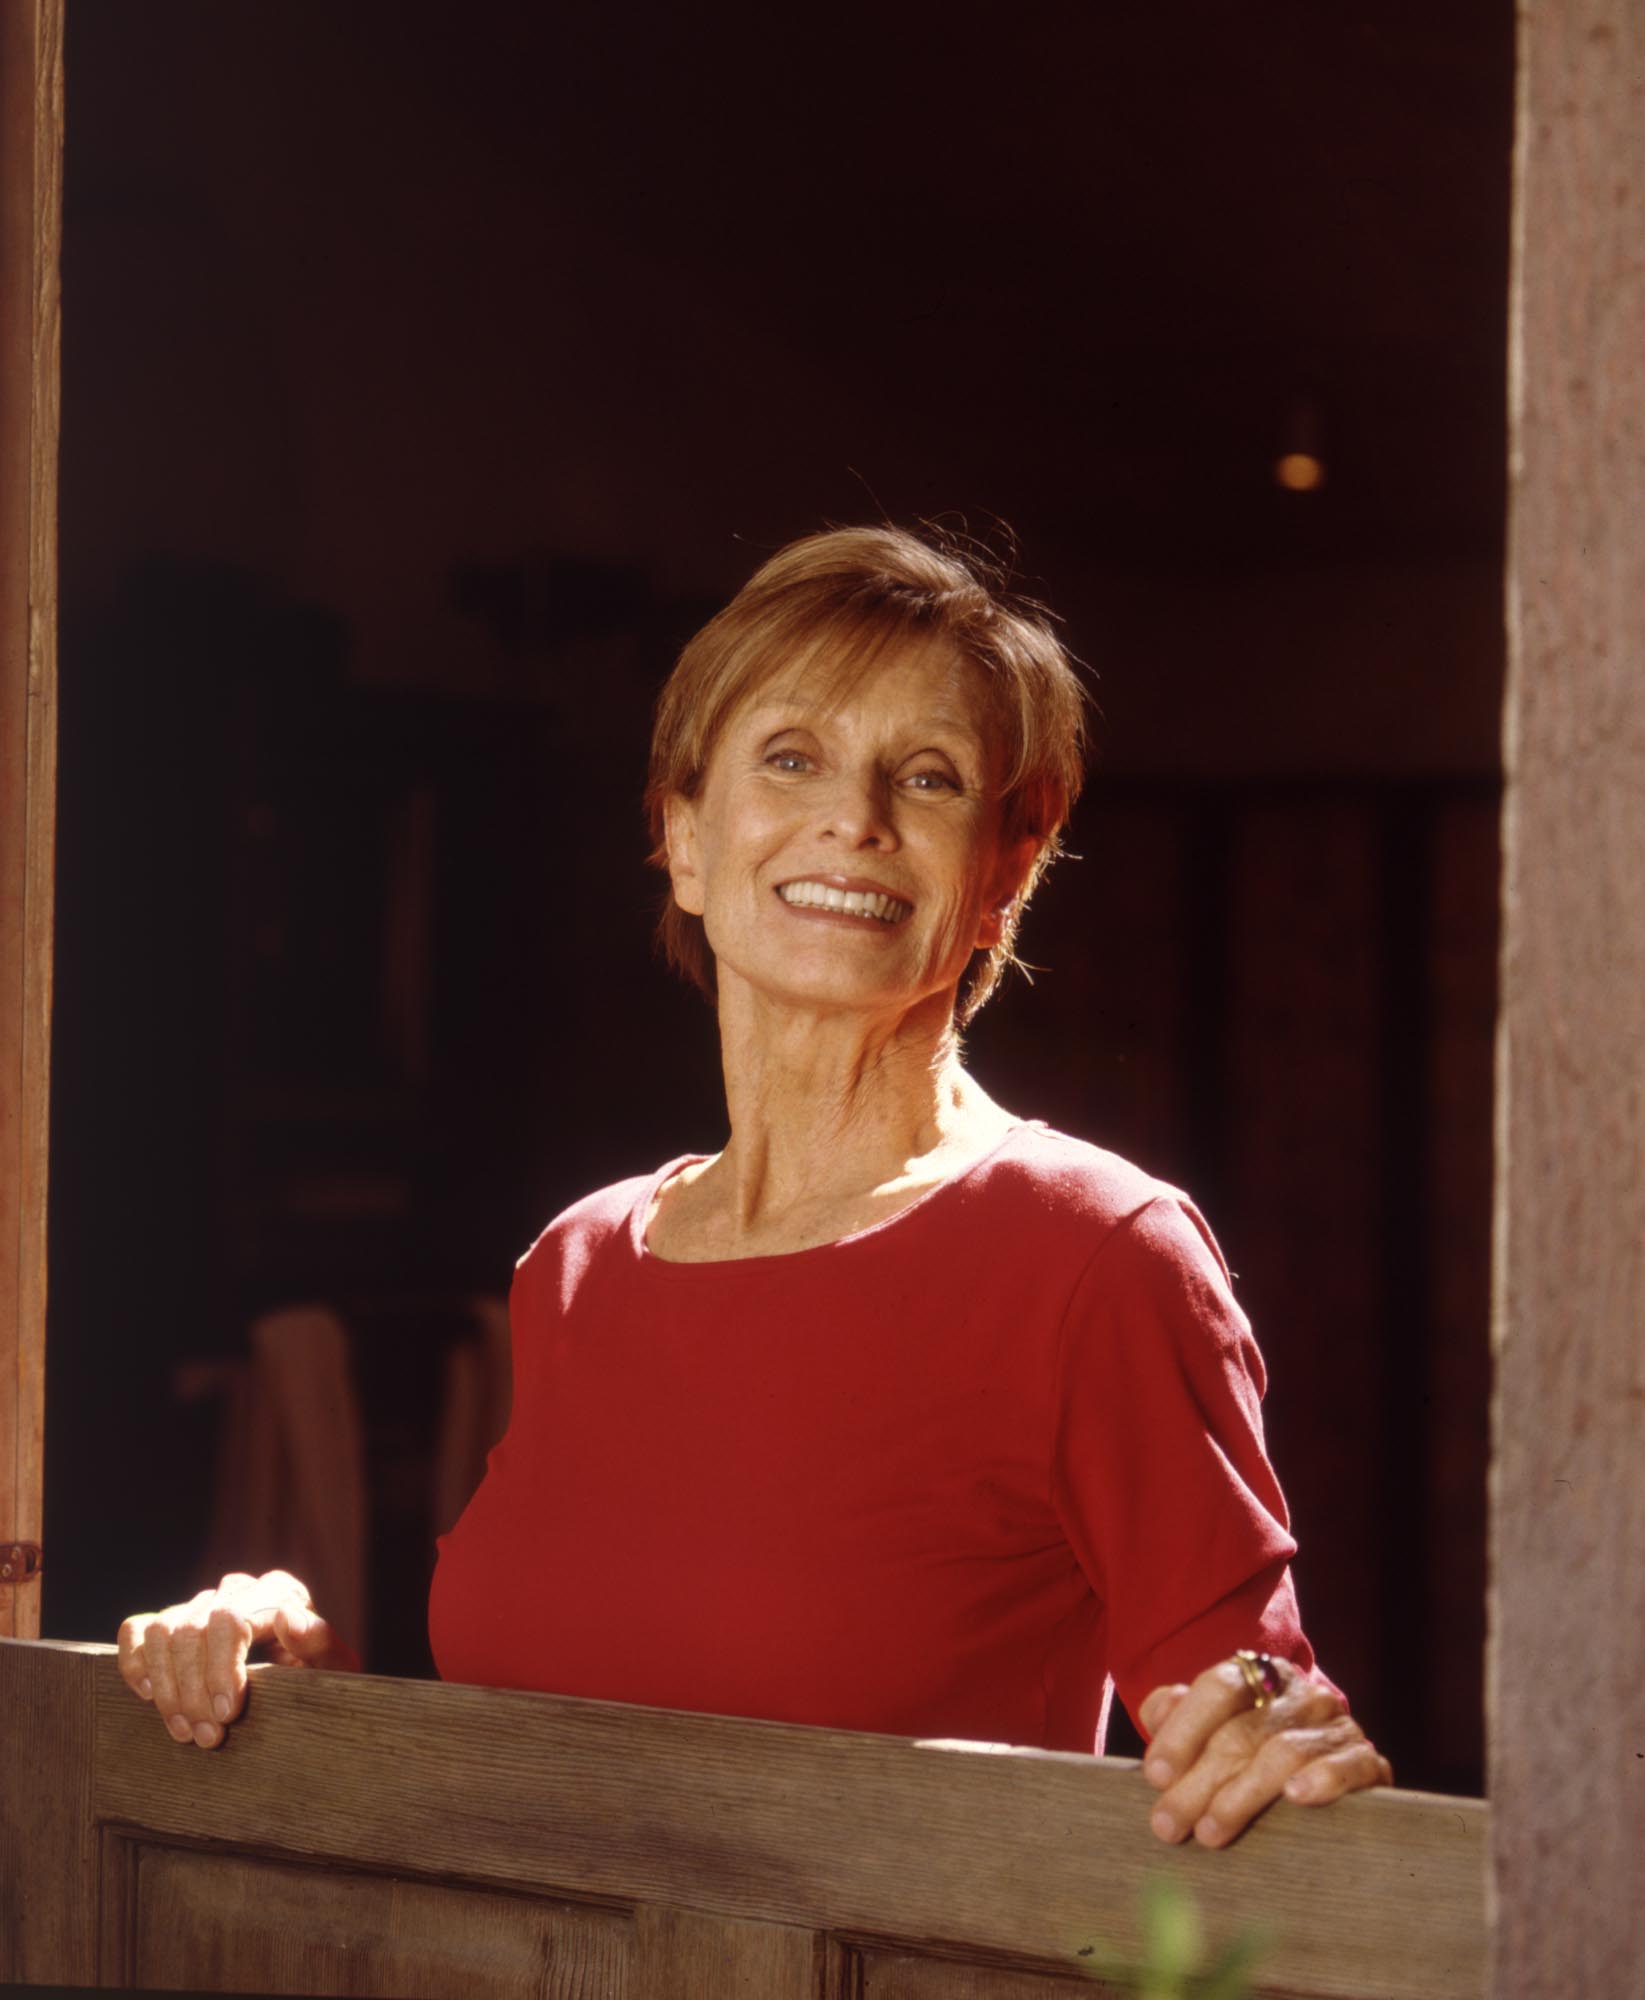 Cloris Leachman posing for exclusive portraits at home with her children and grandchildren in August 2000, Los Angeles. / Source: Getty Images